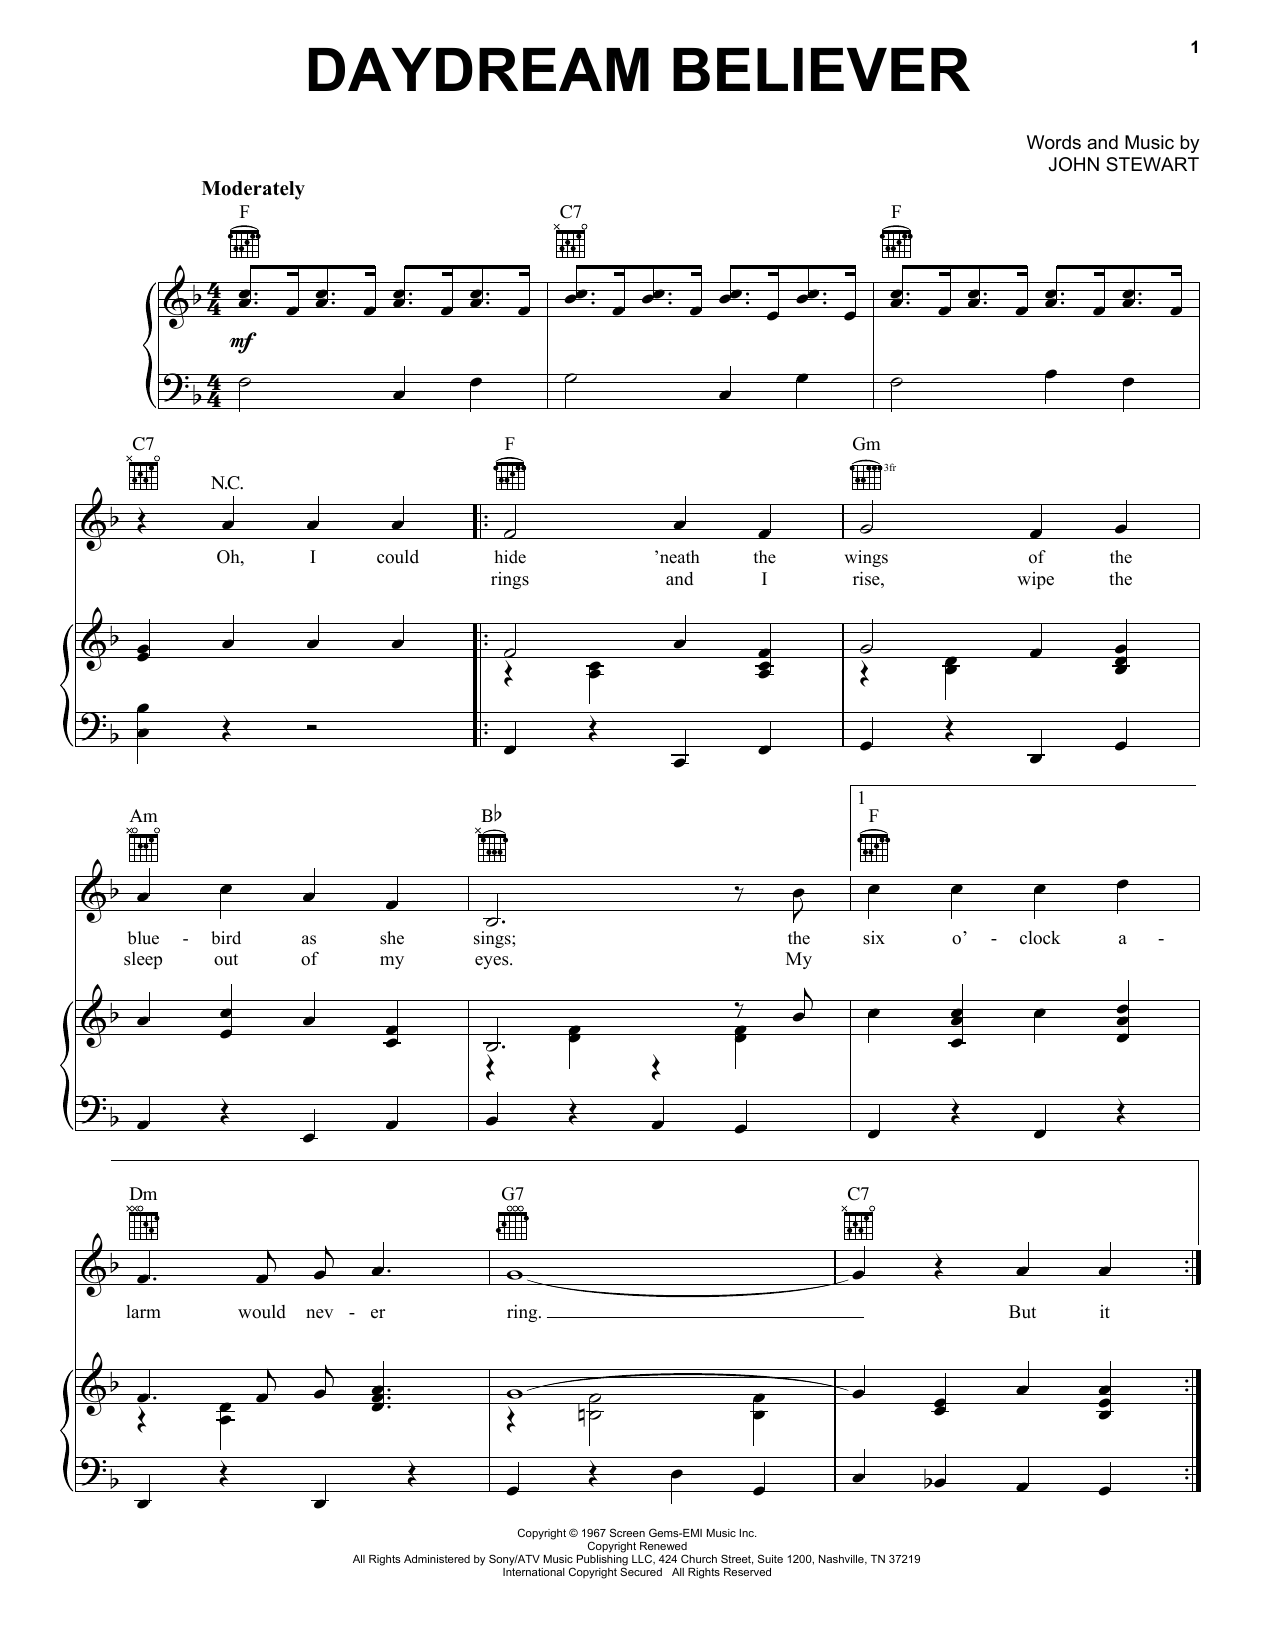 The Monkees "Daydream Believer" Sheet Music Notes, Chords | Piano